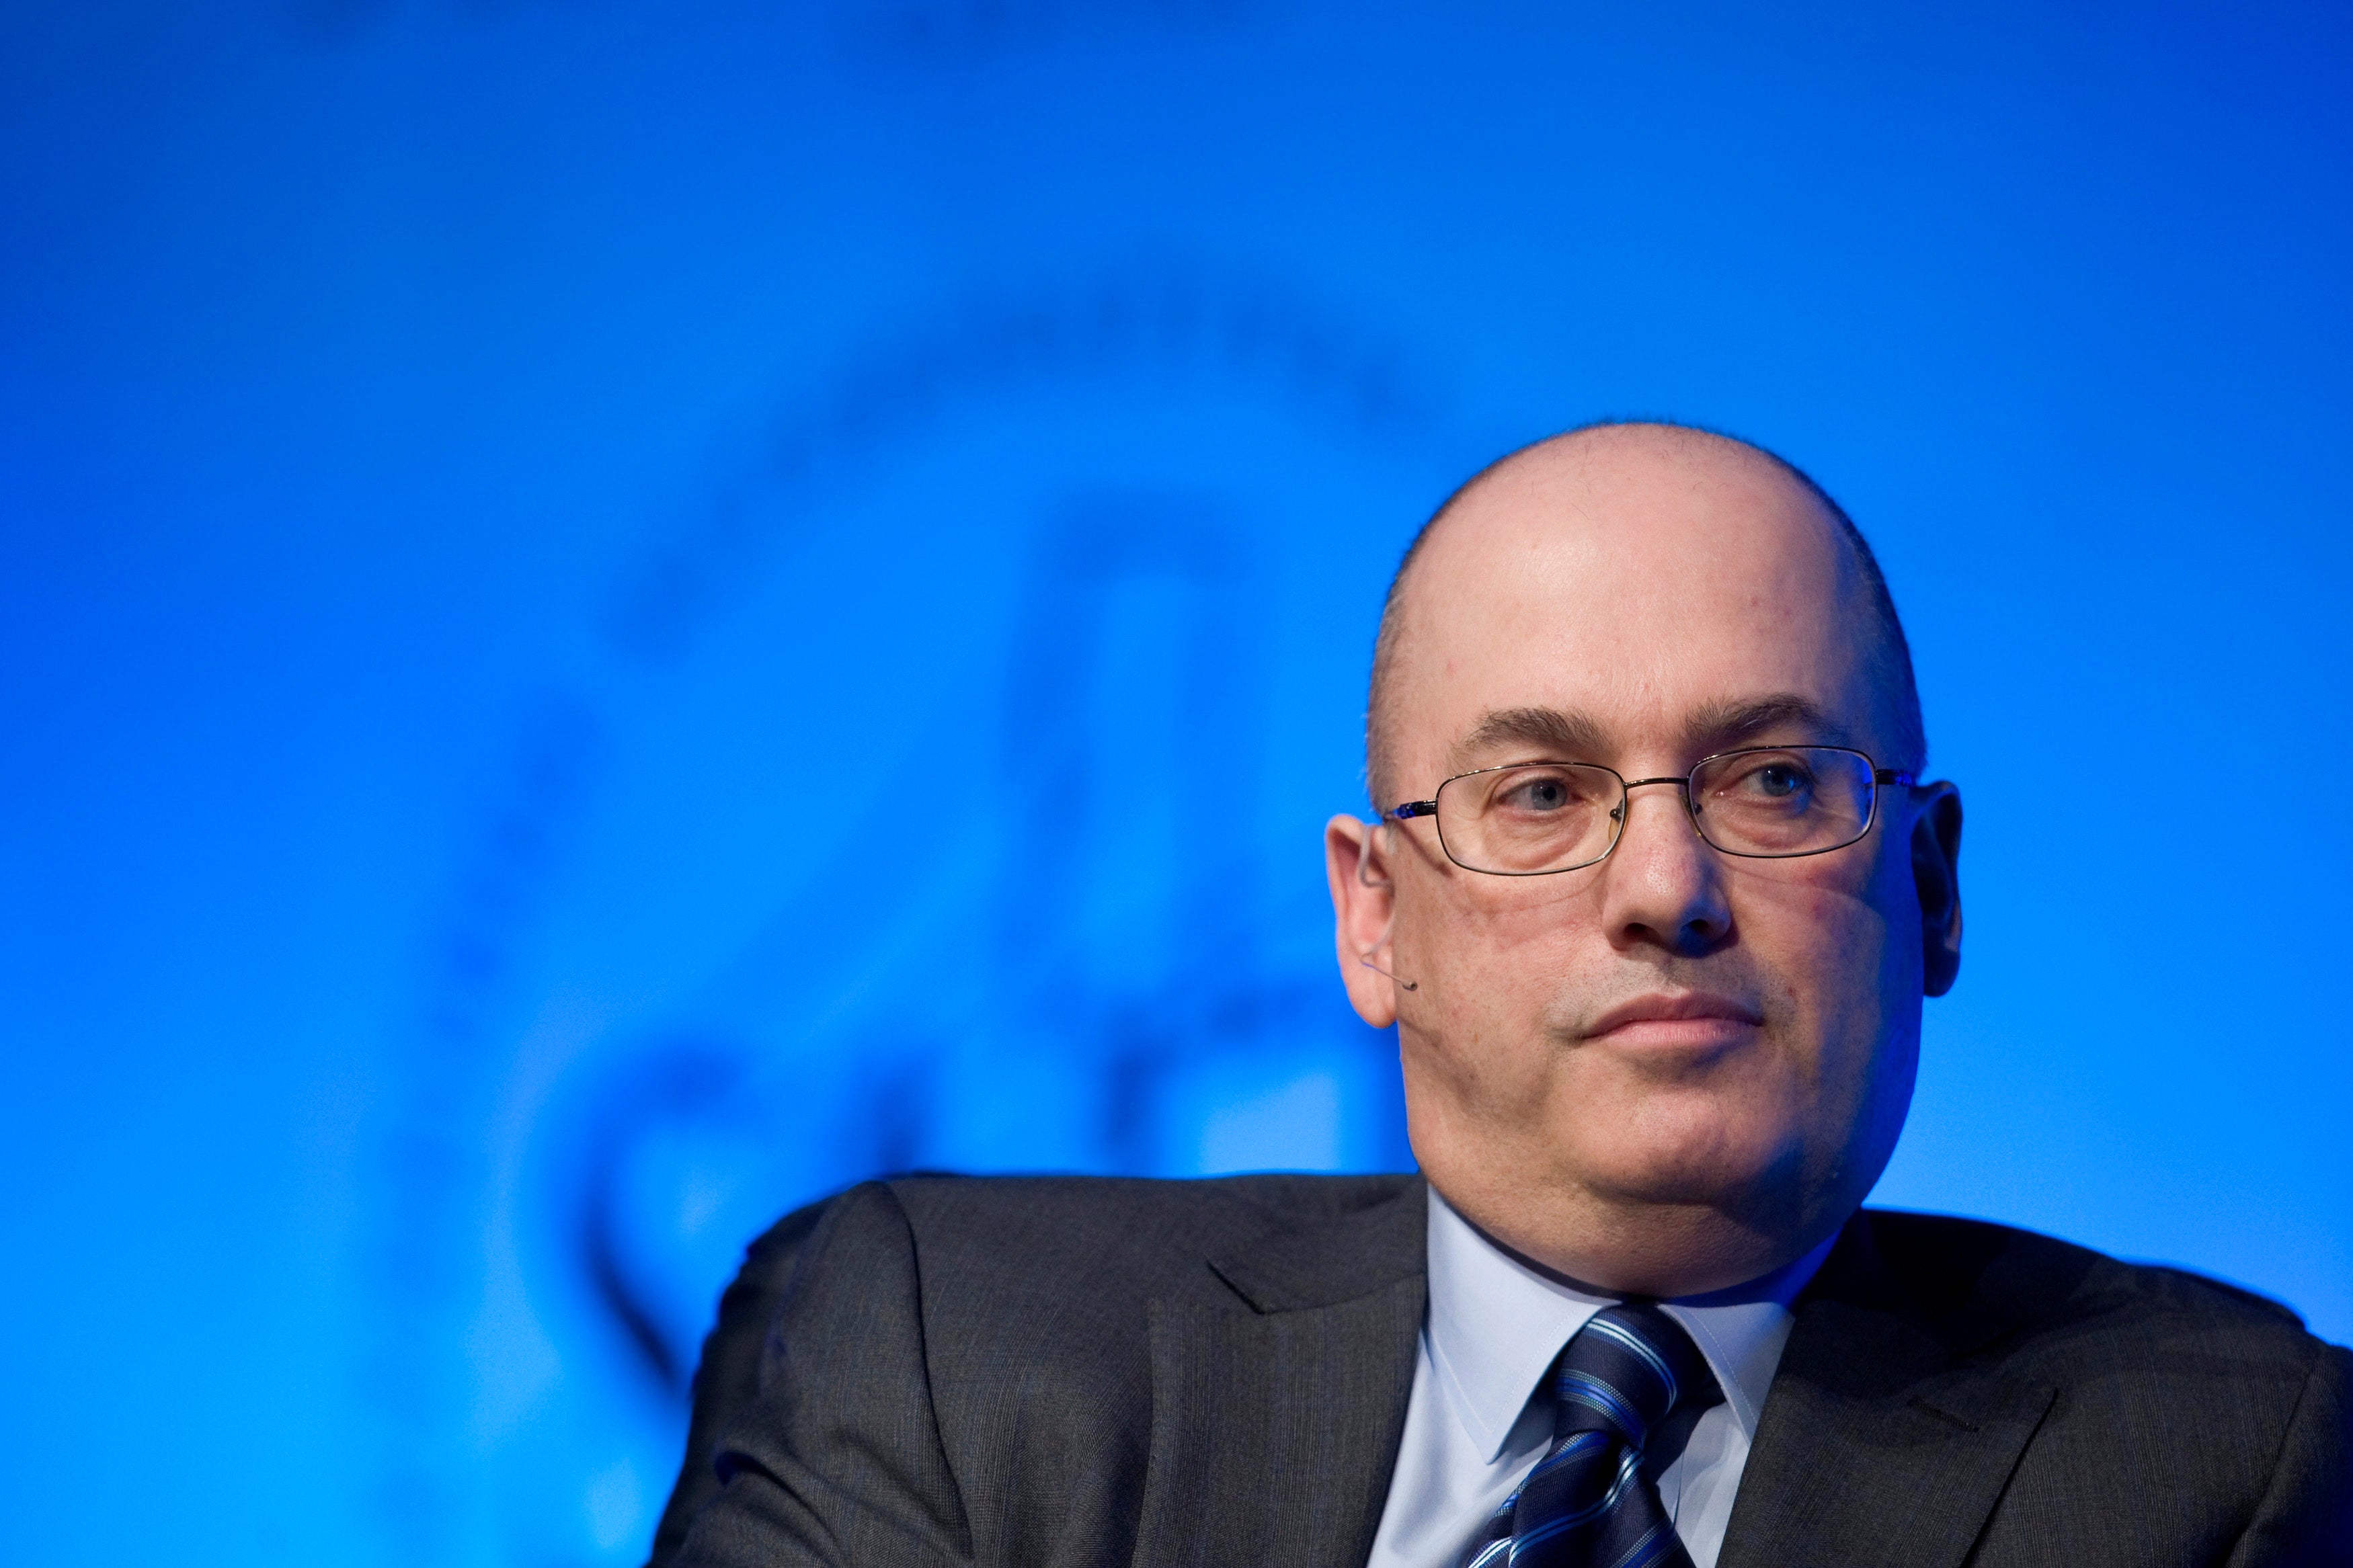 Billionaire MLB owner Steven Cohen challenges after losing GameStop and says he is ‘trying to make a living’